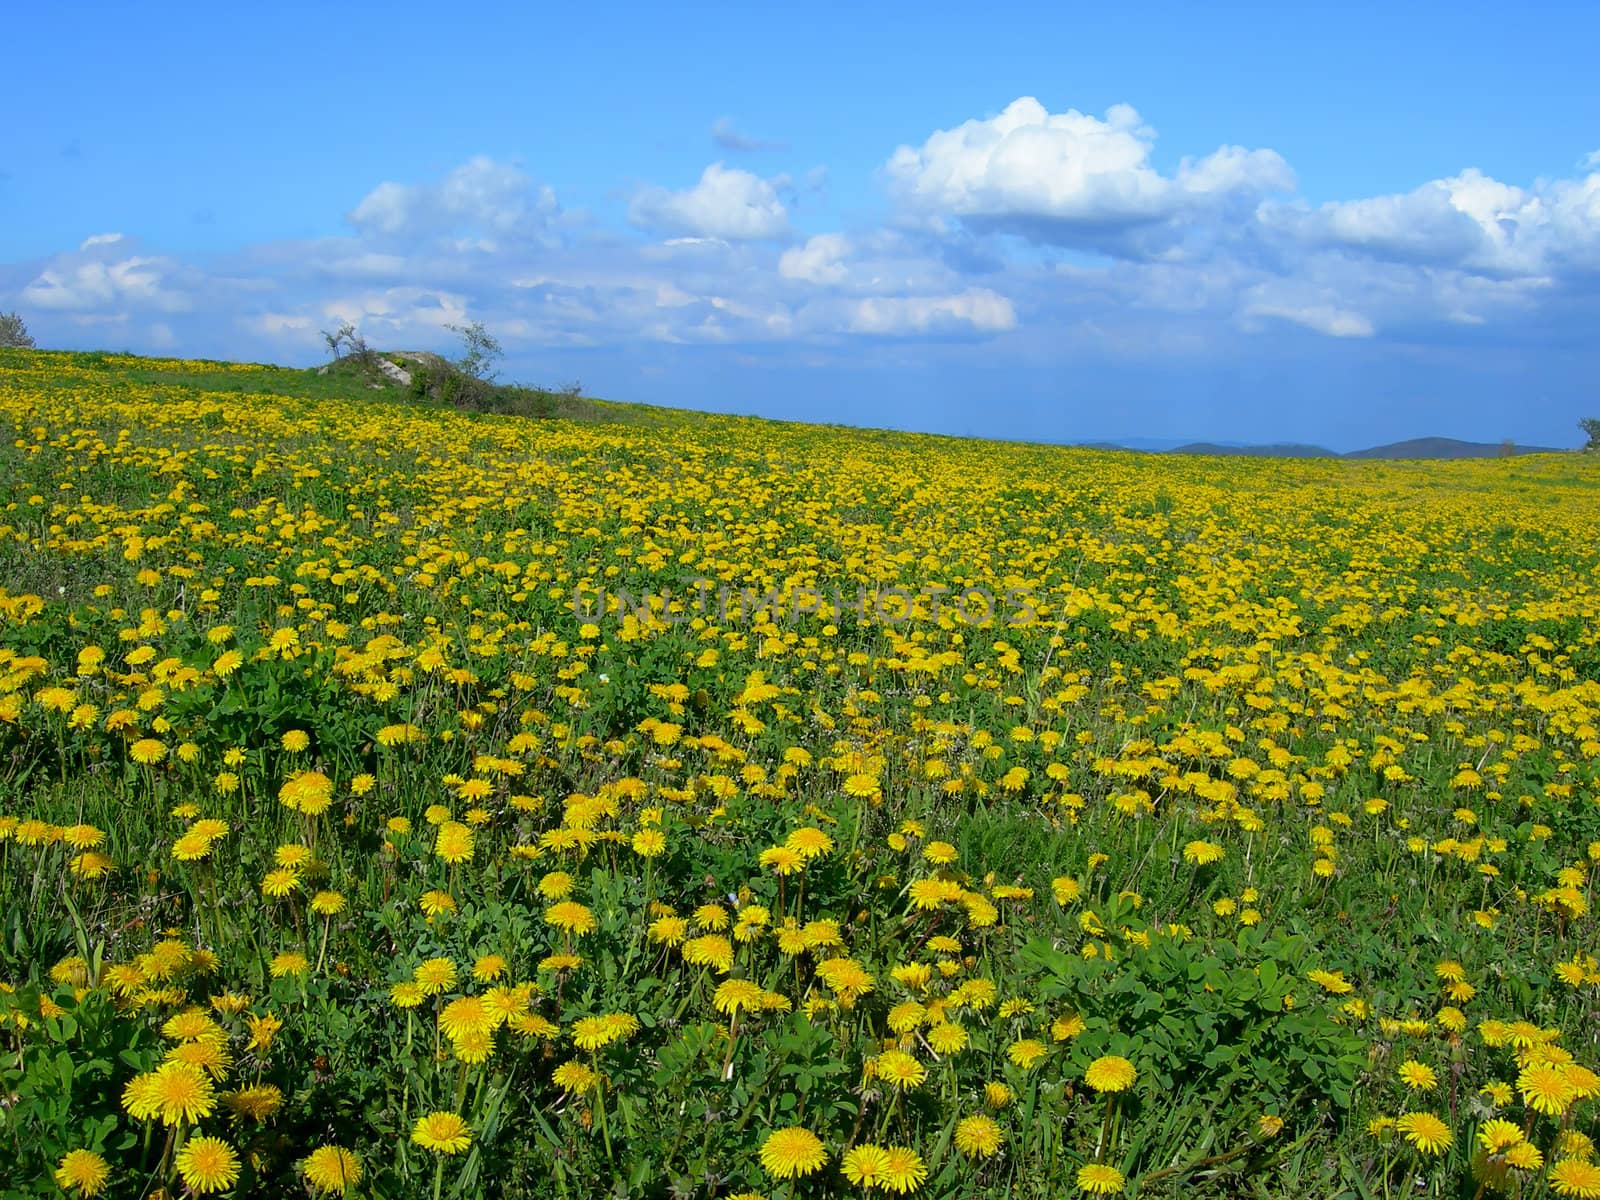 Beautiful summer field full of yellow blooming dandelions with a forest in the back